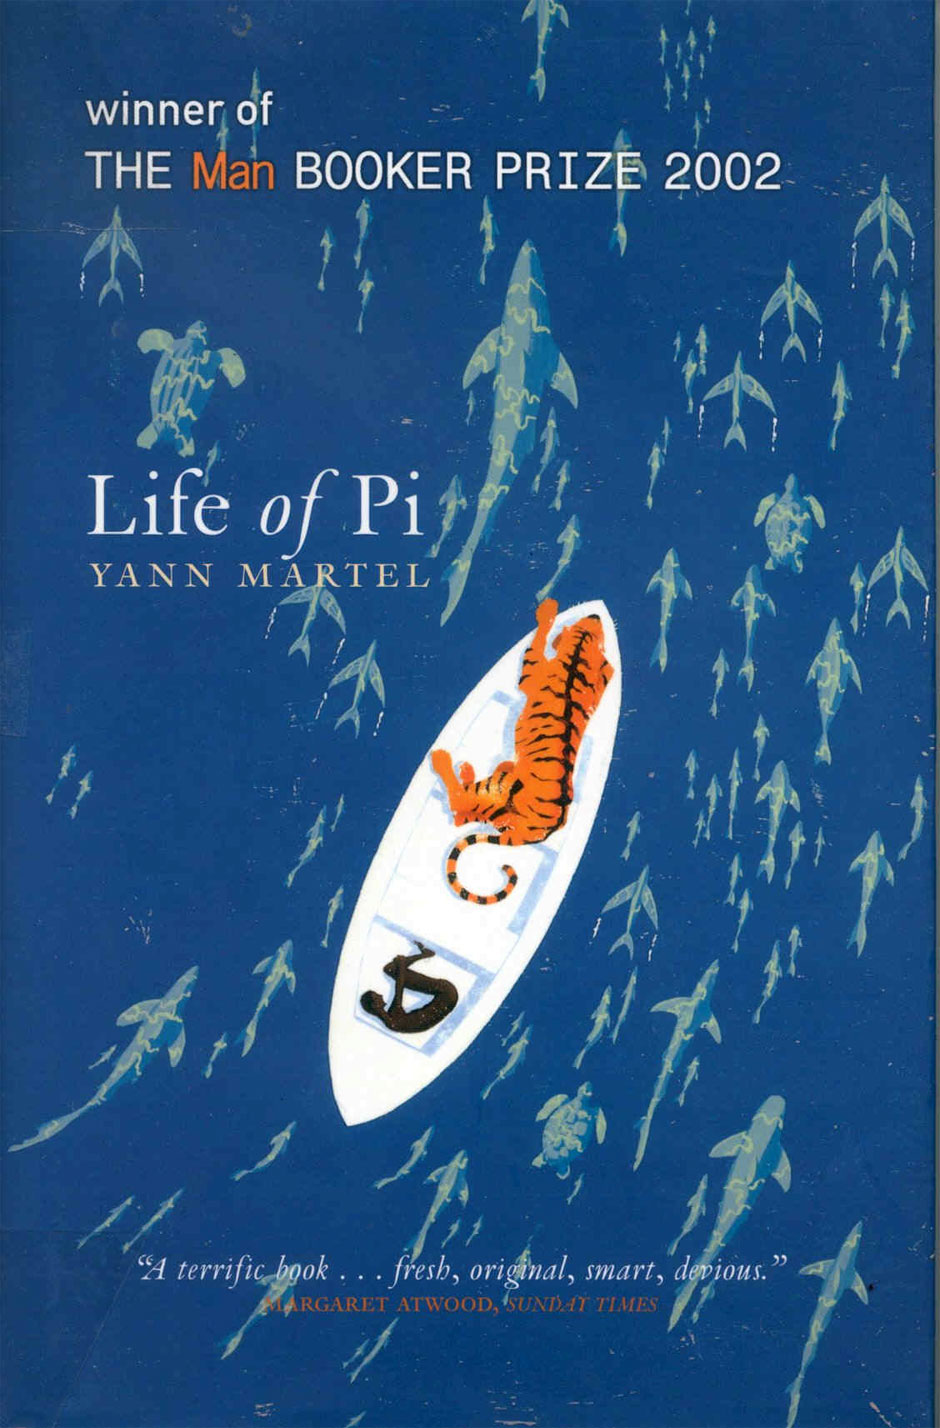 life-of-pie-book-cover.jpg